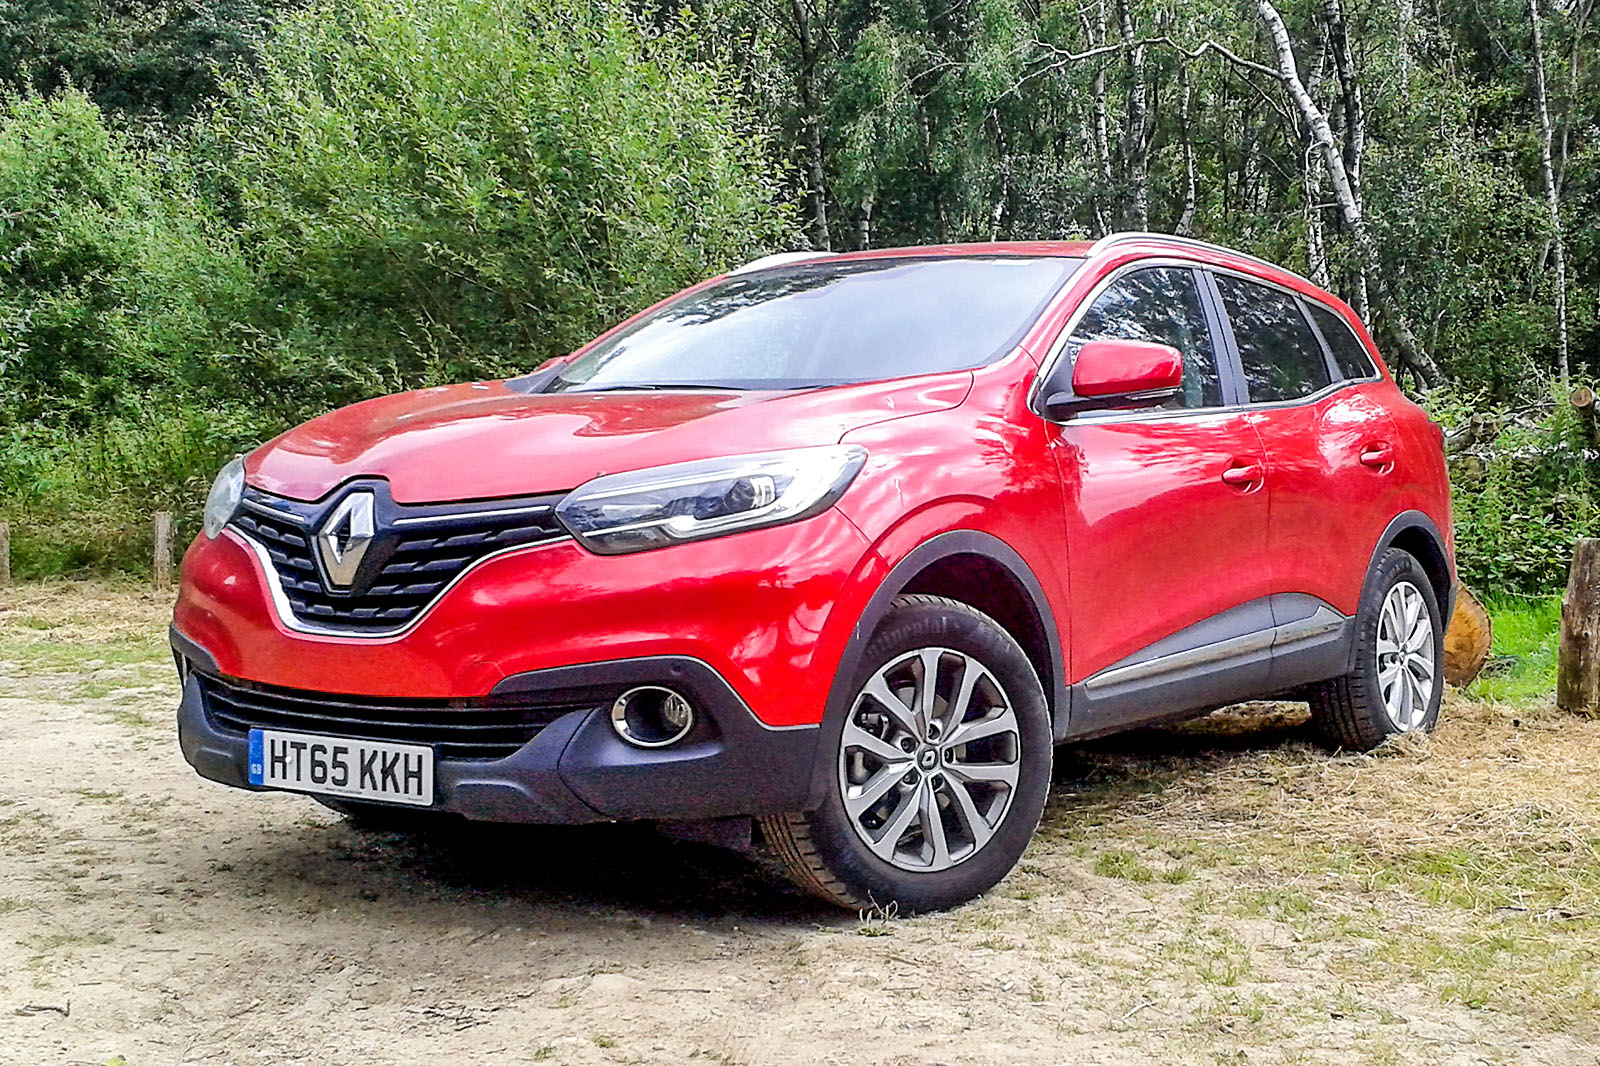 Renault Kadjar longterm test review eco driving issues